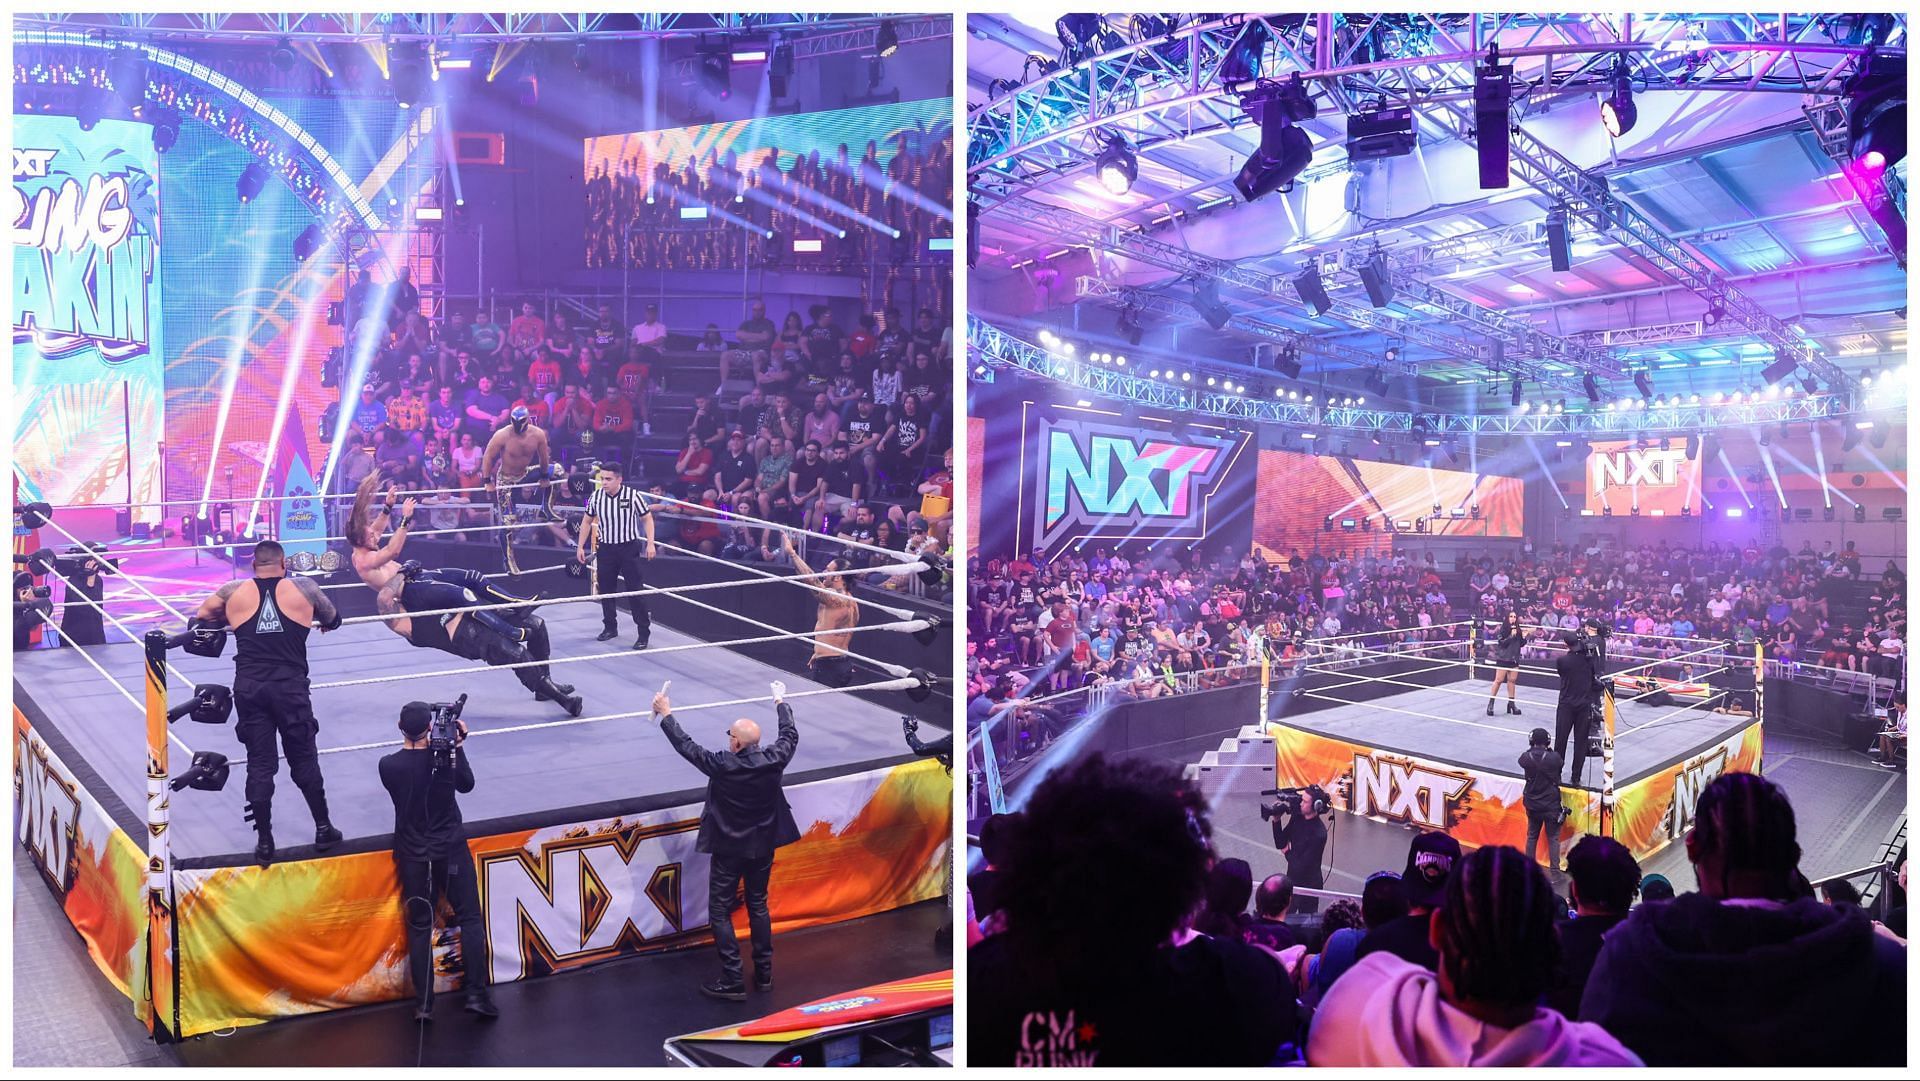 The WWE Universe packs the Performance Center for NXT action